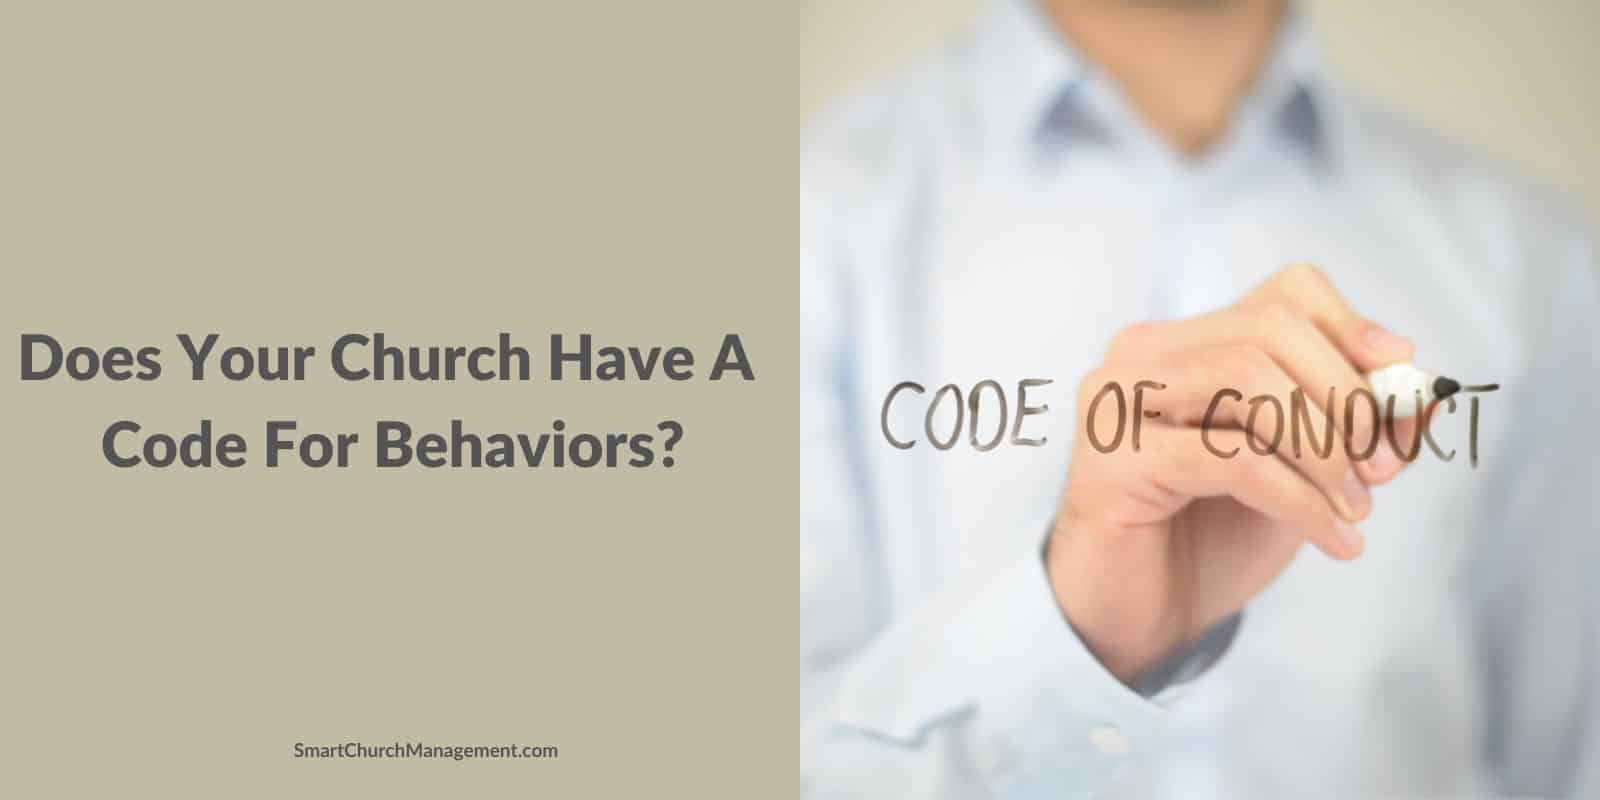 Code of conduct for churches